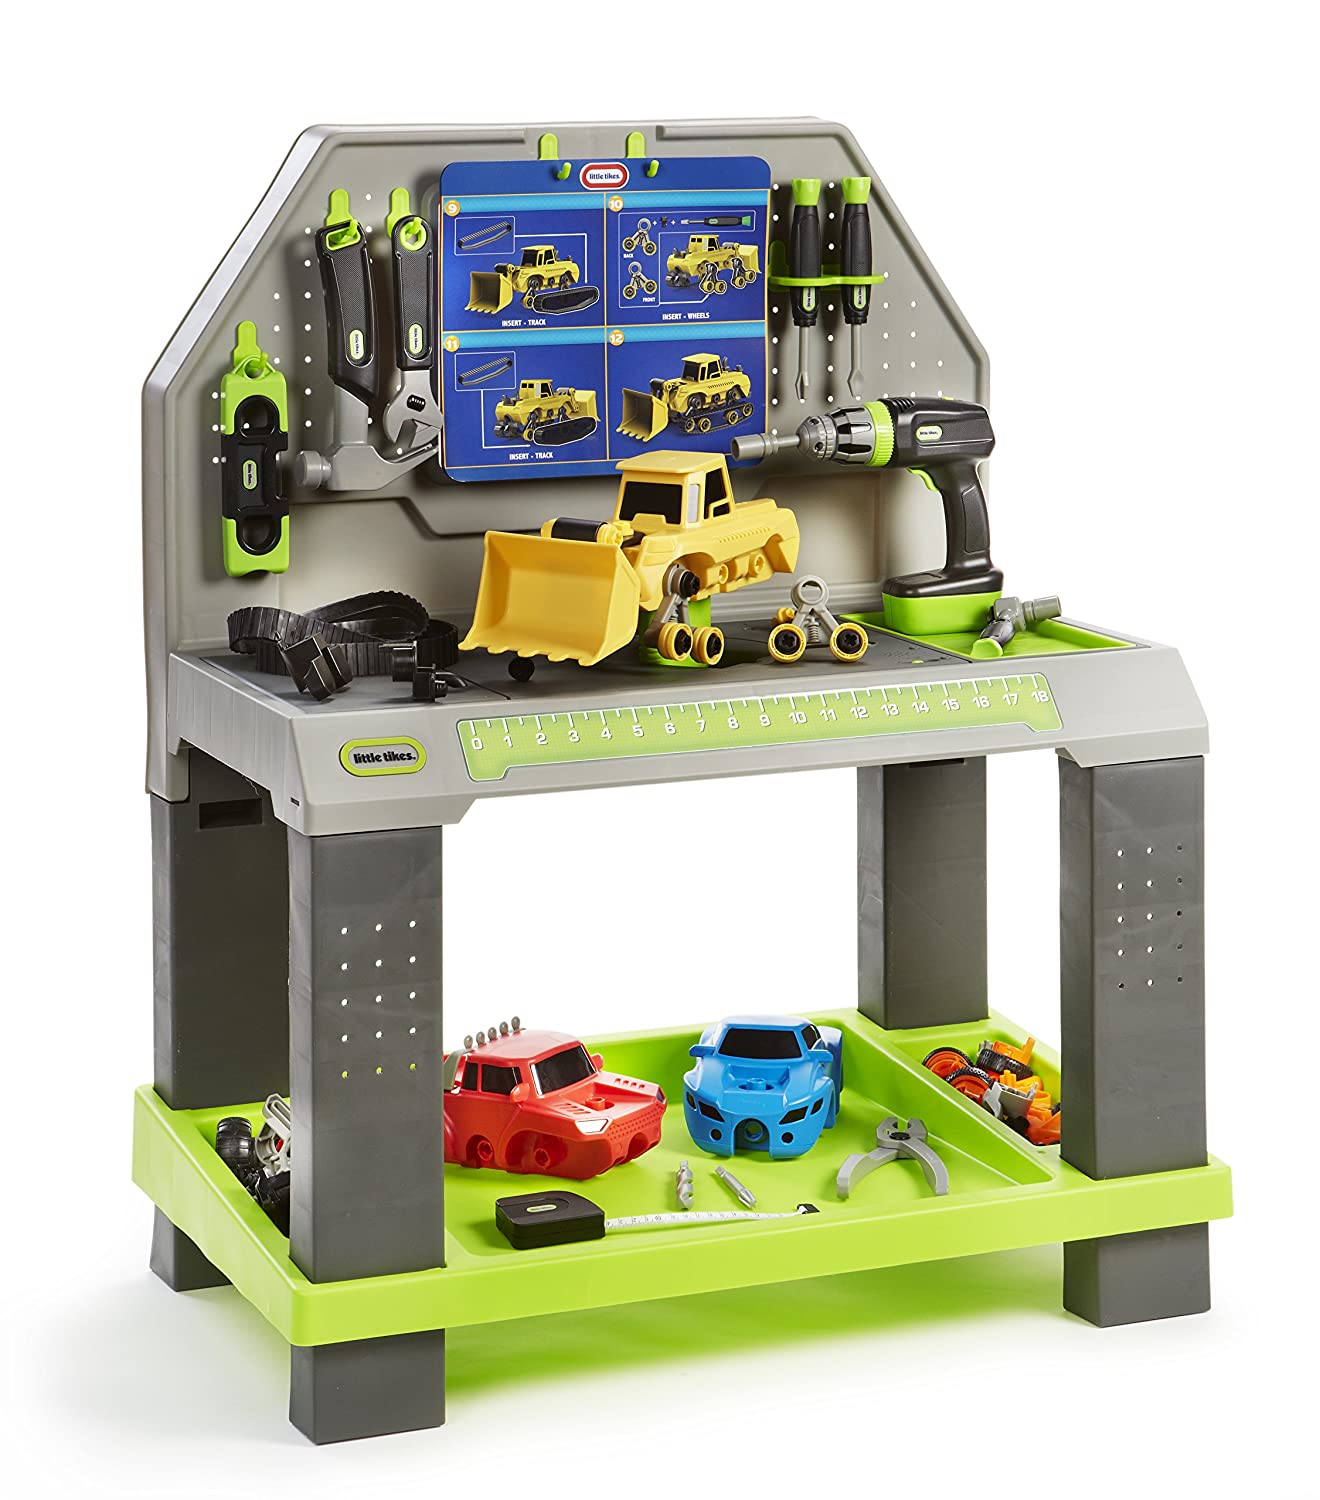 Top 9 Best Kids Toy Tool Bench Reviews in 2023 7